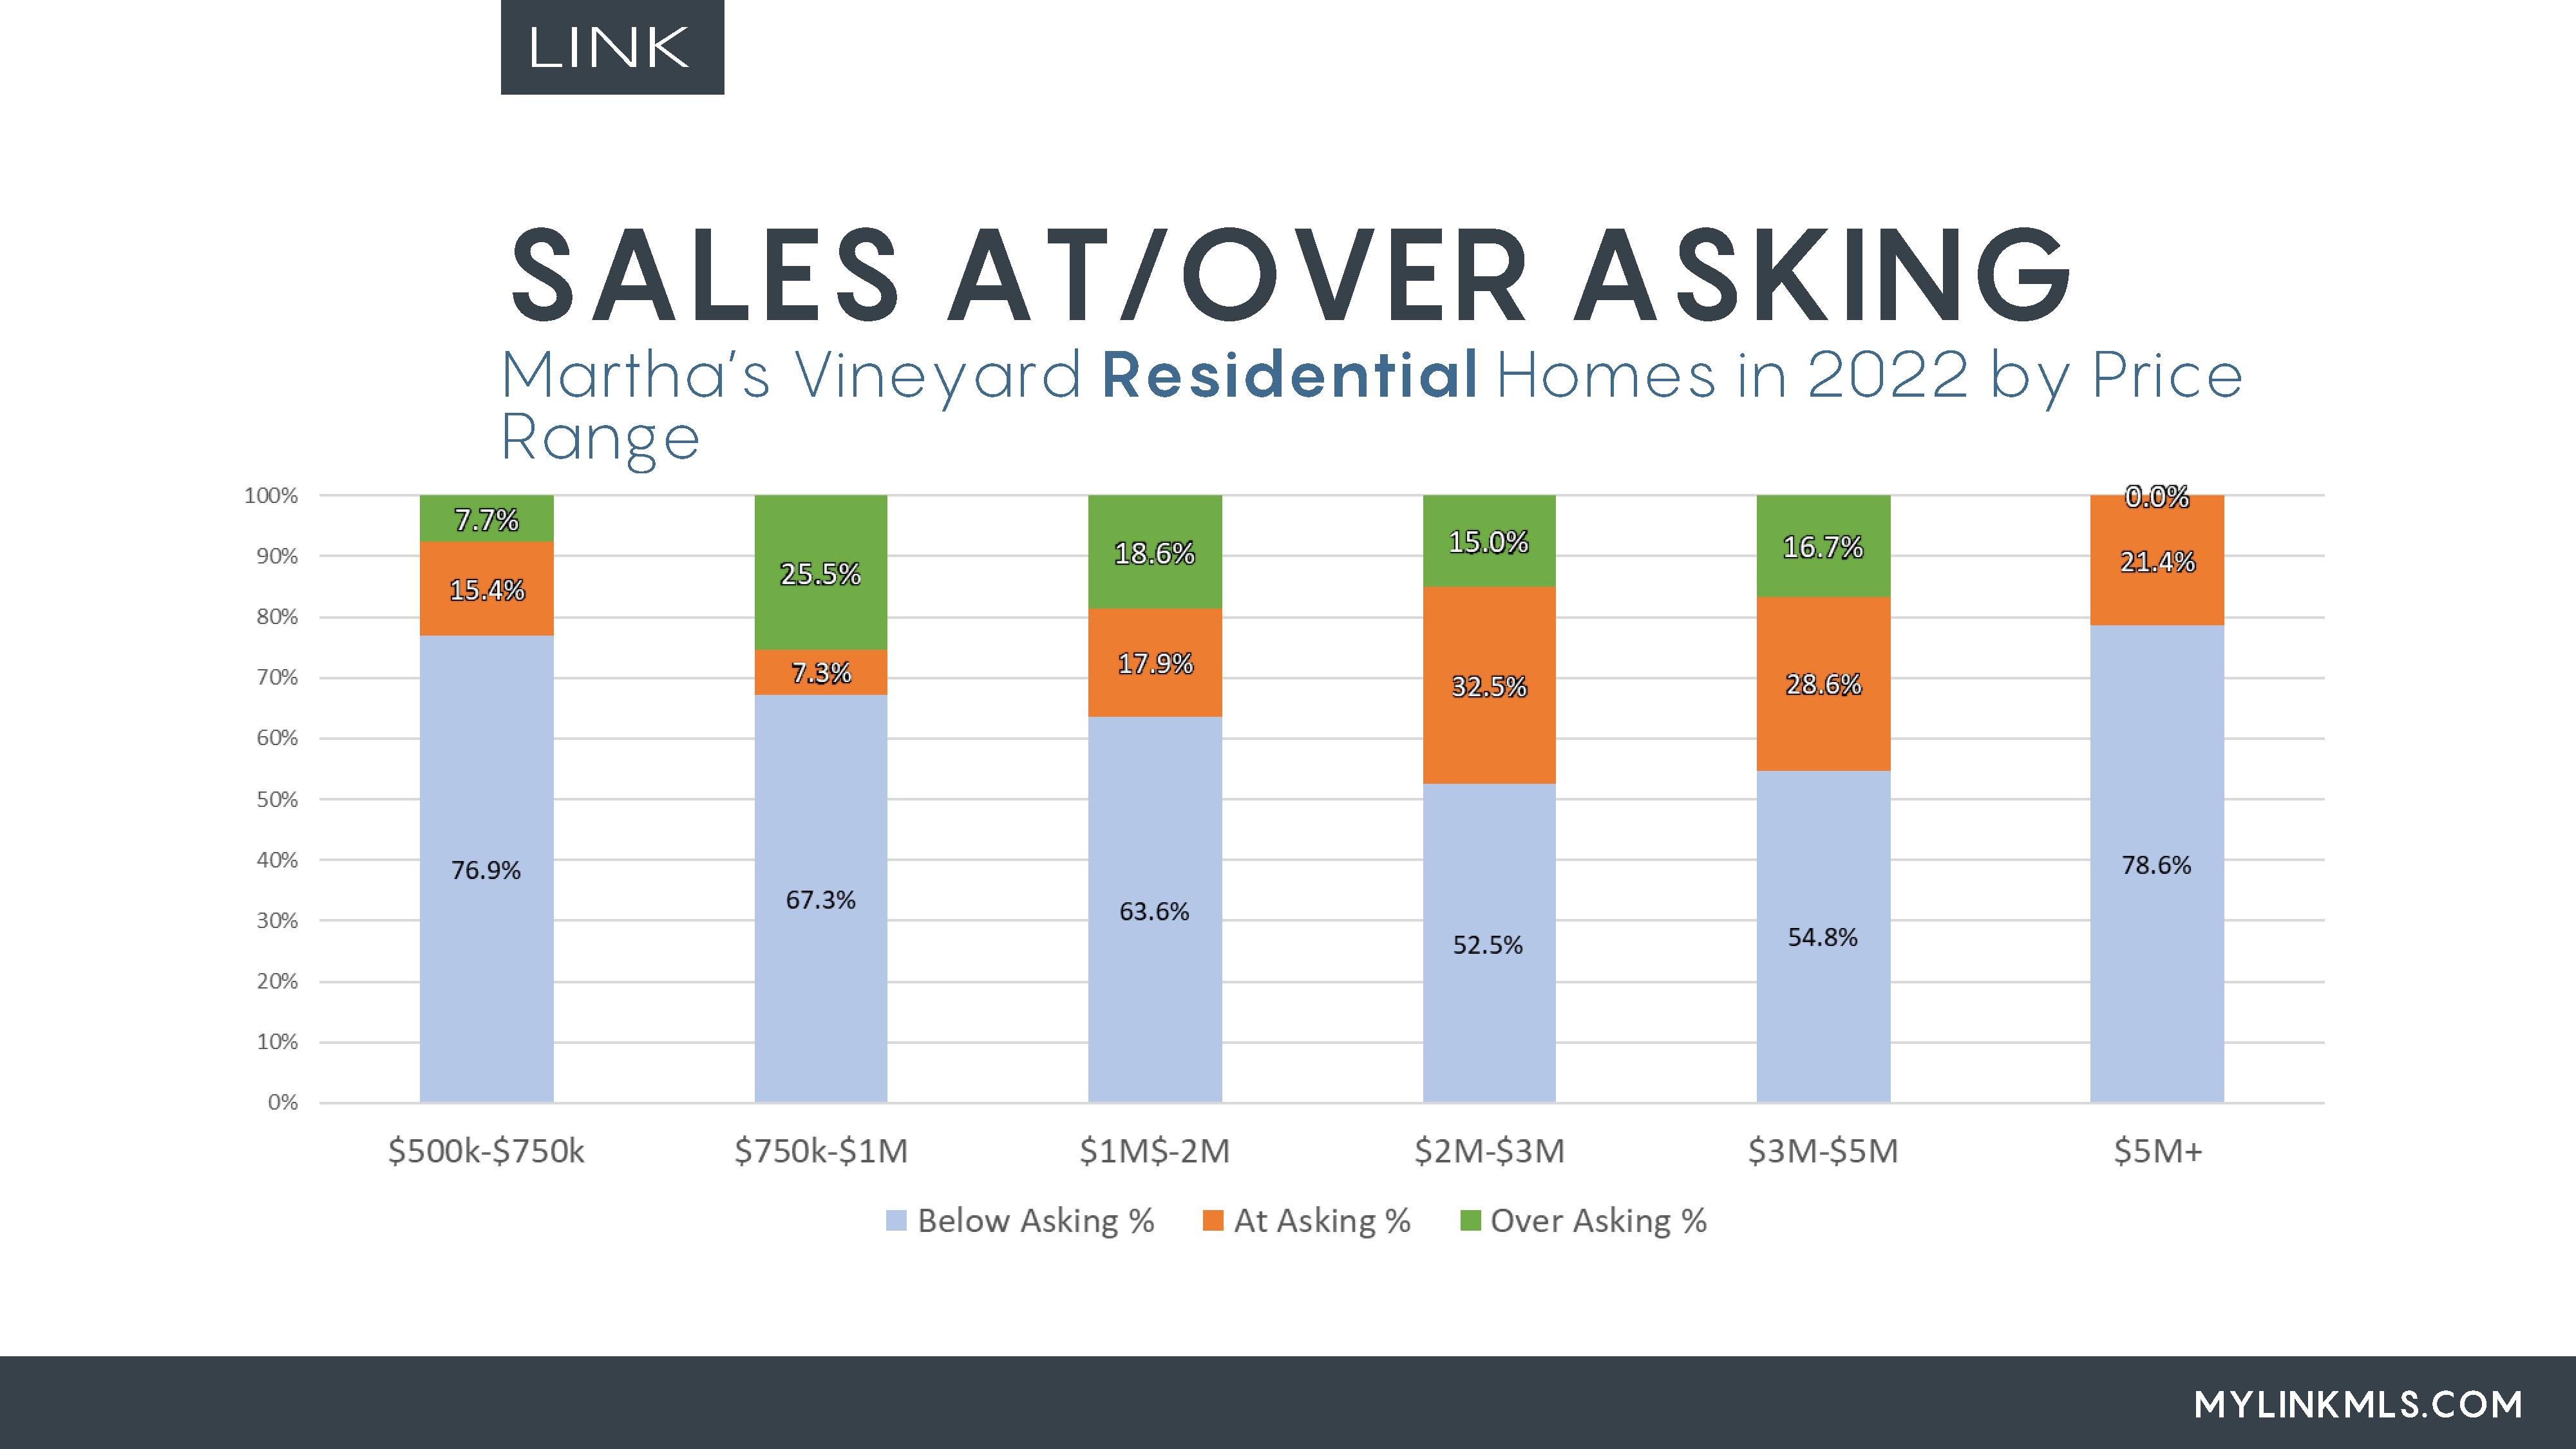 LINK Chart sales over asking by price point